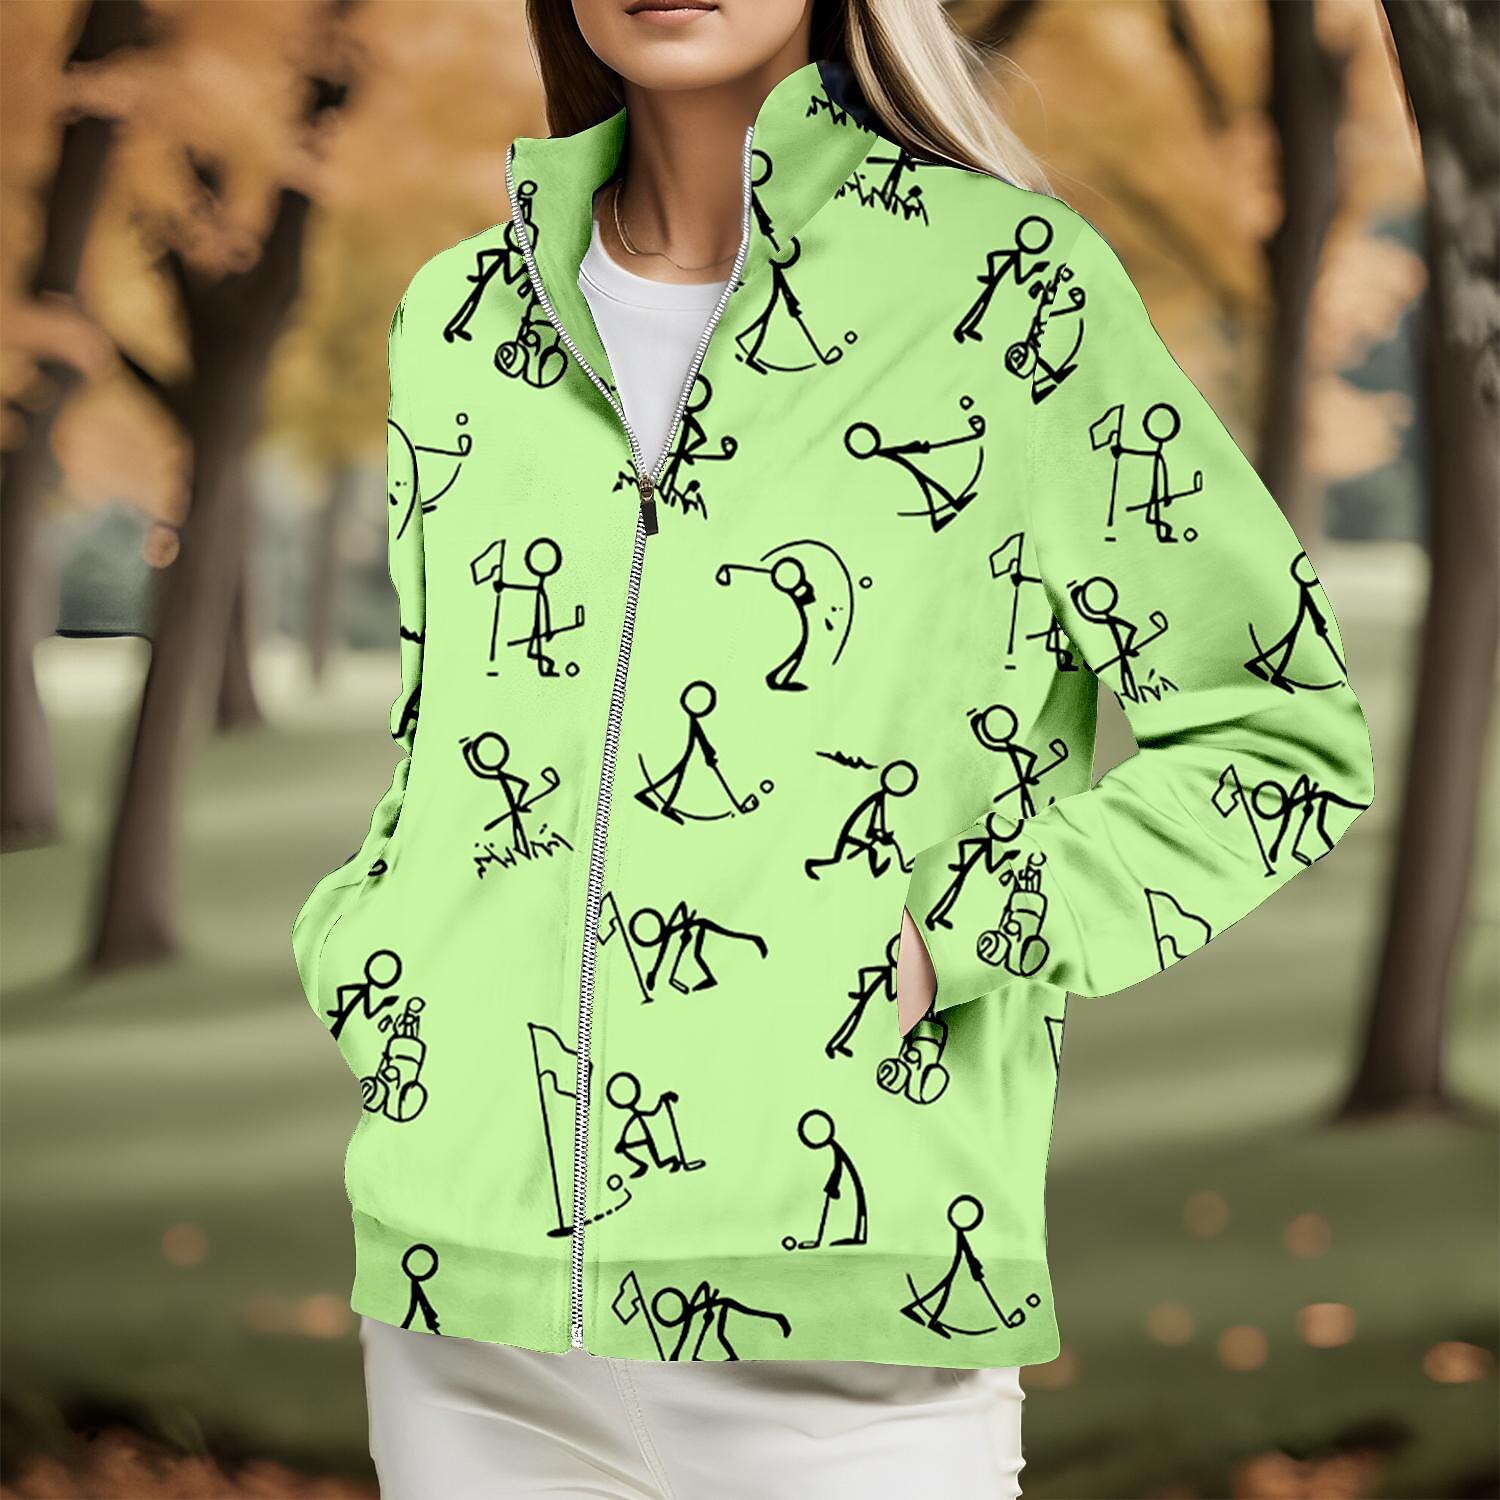 Women's Golf Hoodie Golf Pullover Golf Sweatshirt Thermal Warm Breathable Moisture Wicking Long Sleeve Golf Outerwear Top Regular Fit Side Pockets Full Zip Funny Printed Spring Autumn Tennis Golf 2023 - € 27.99 –P4